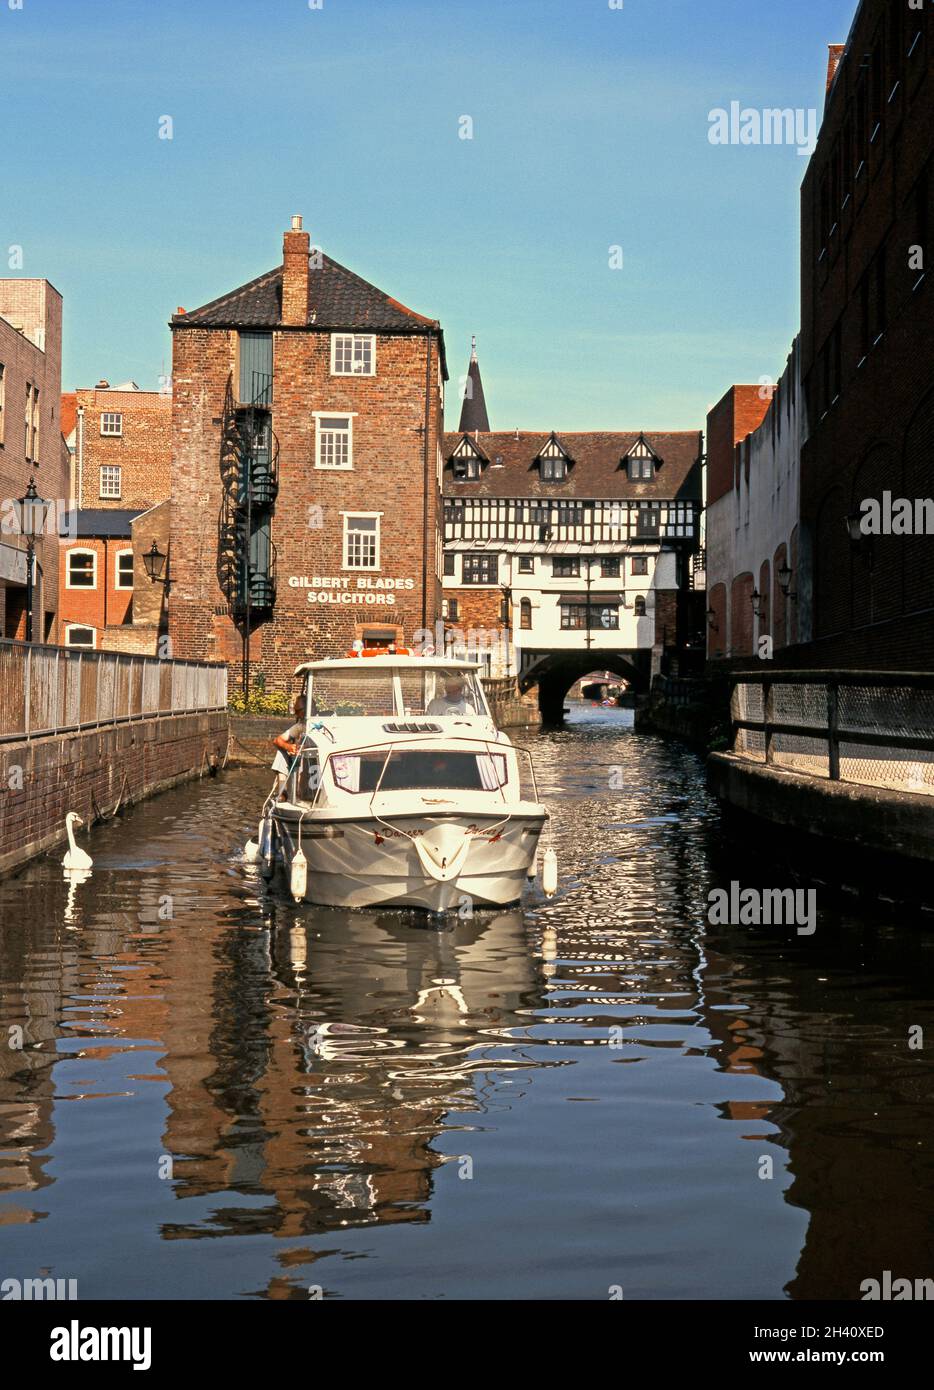 Boat and swan on the River Witham with the High Street Bridge to rear, Lincoln, UK. Stock Photo